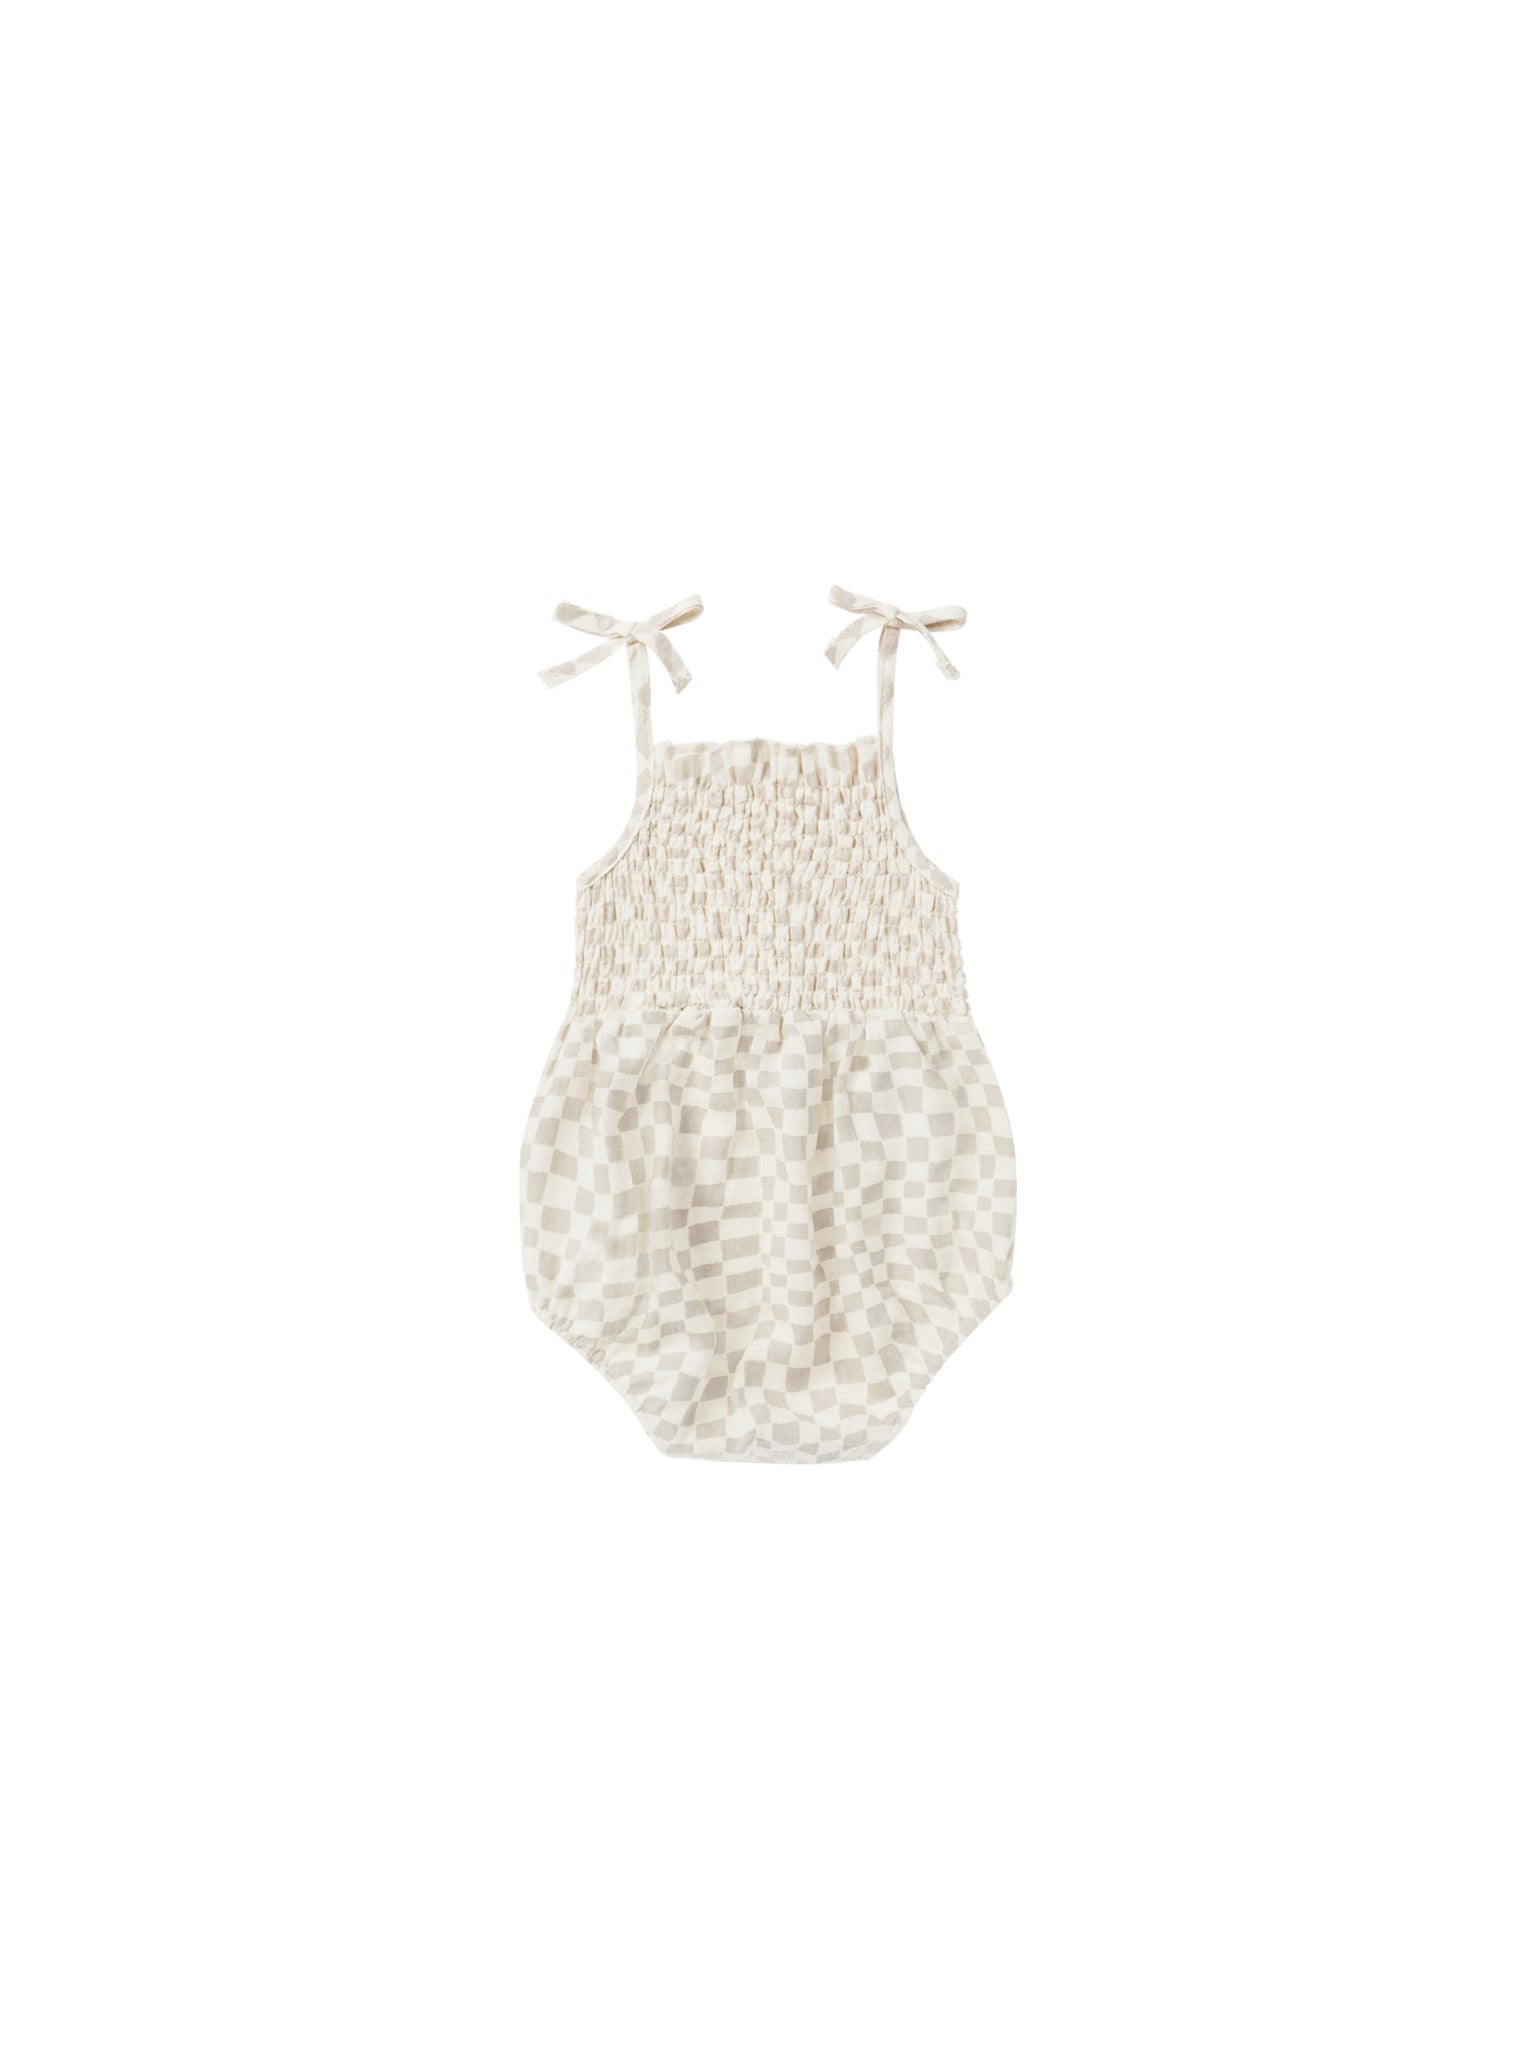 Kaia Romper - Dove Check - Twinkle Twinkle Little One